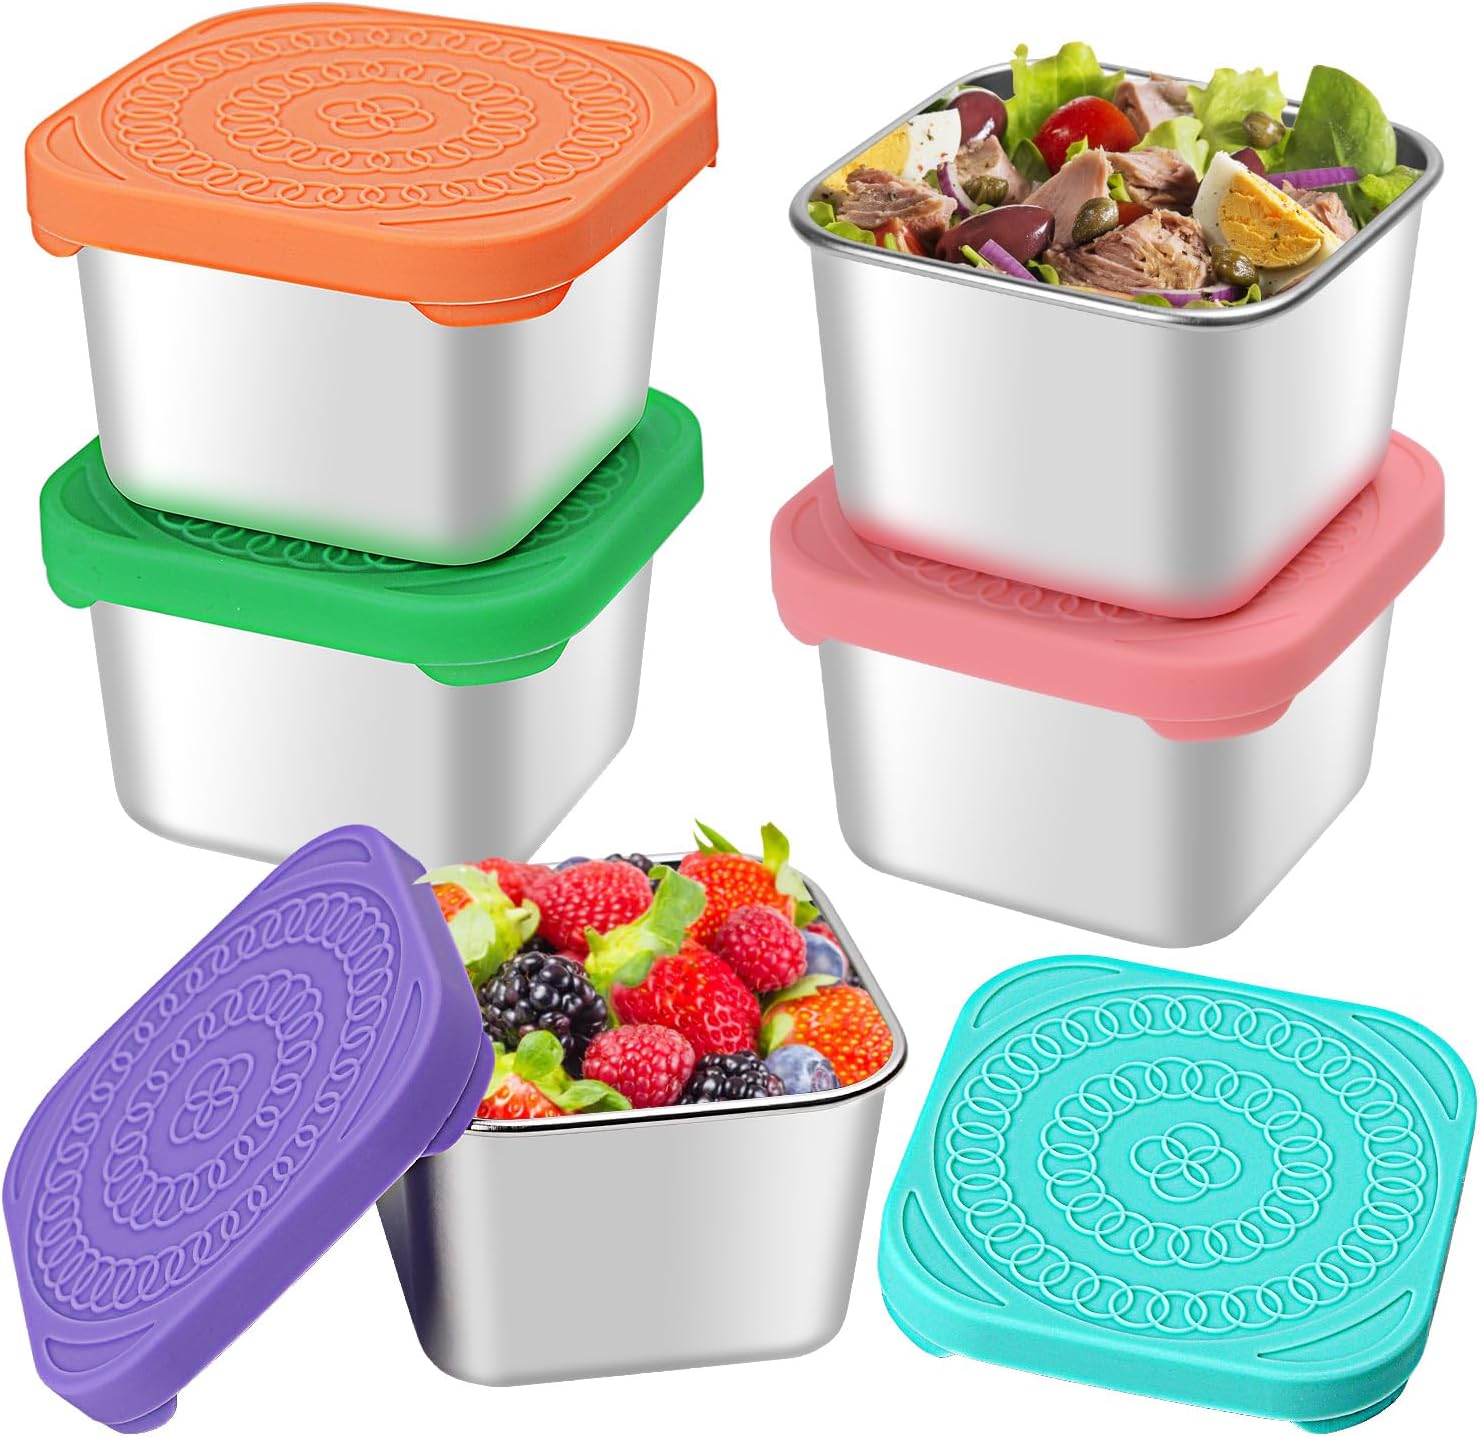 Prime, 2.5 L plastic lunch container with stainless steel insulation at a  low price